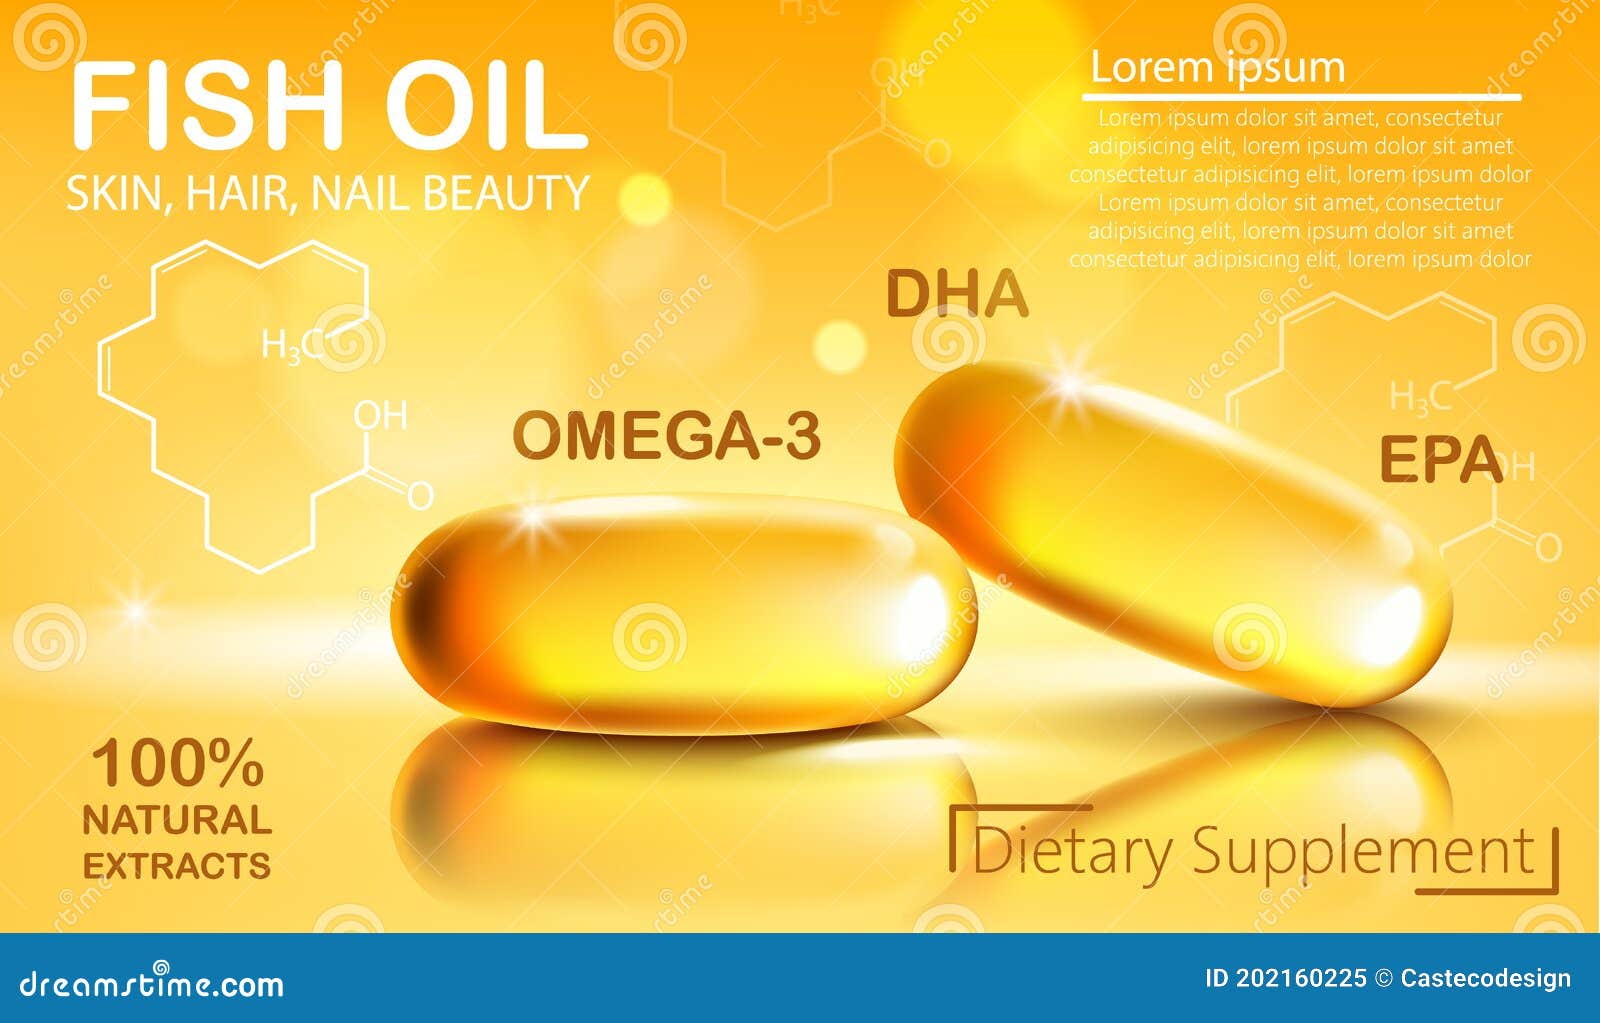 Two Shiny Capsules with Natural Extract of Fish Oil for Skin, Hair and Nail  Beauty. Dietary Supplement with OMEGA-3, DHA Stock Vector - Illustration of  omega, essential: 202160225